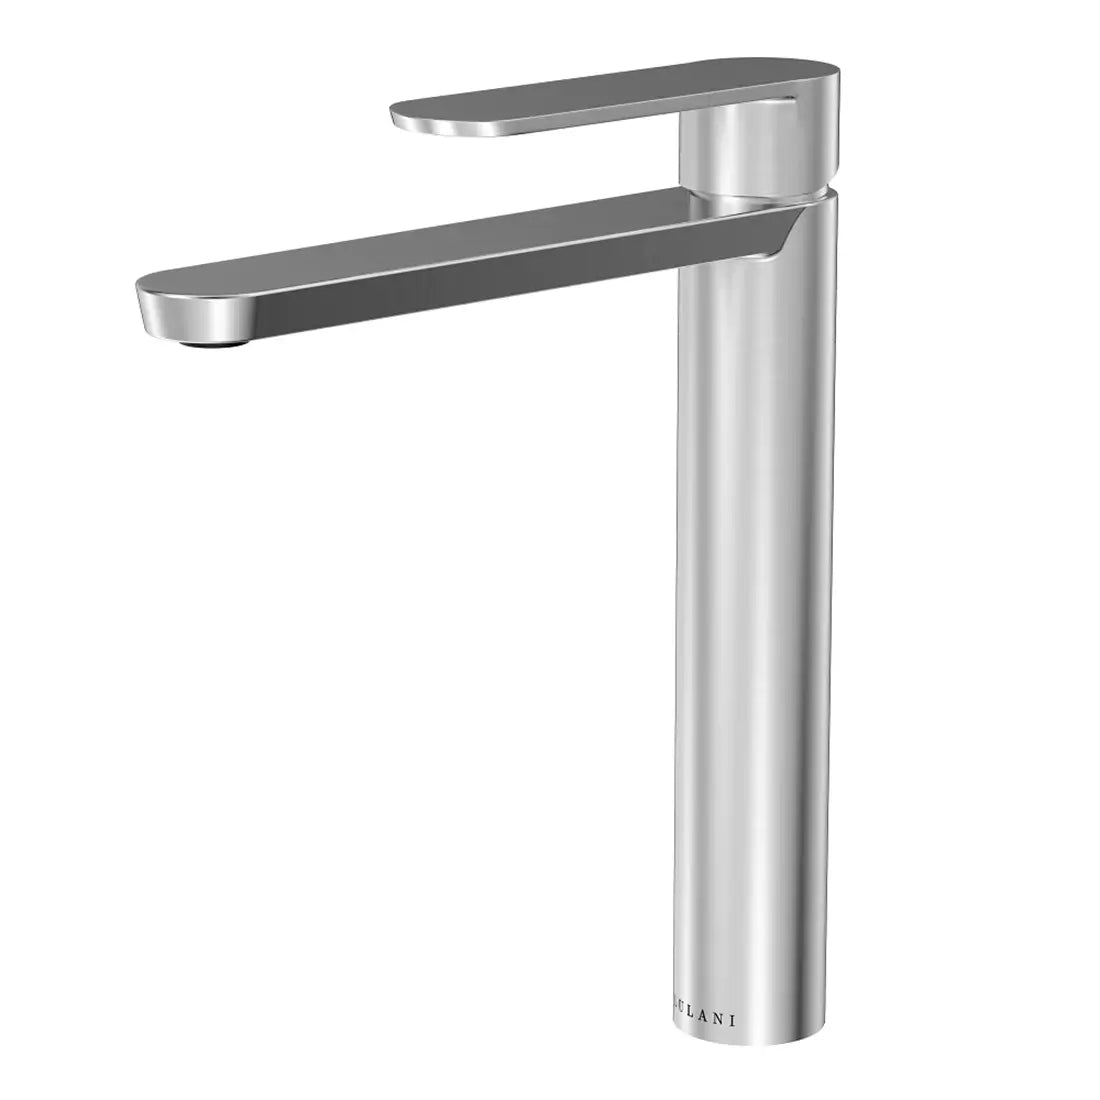 Yasawa - Vessel Bathroom Faucet with drain assembly